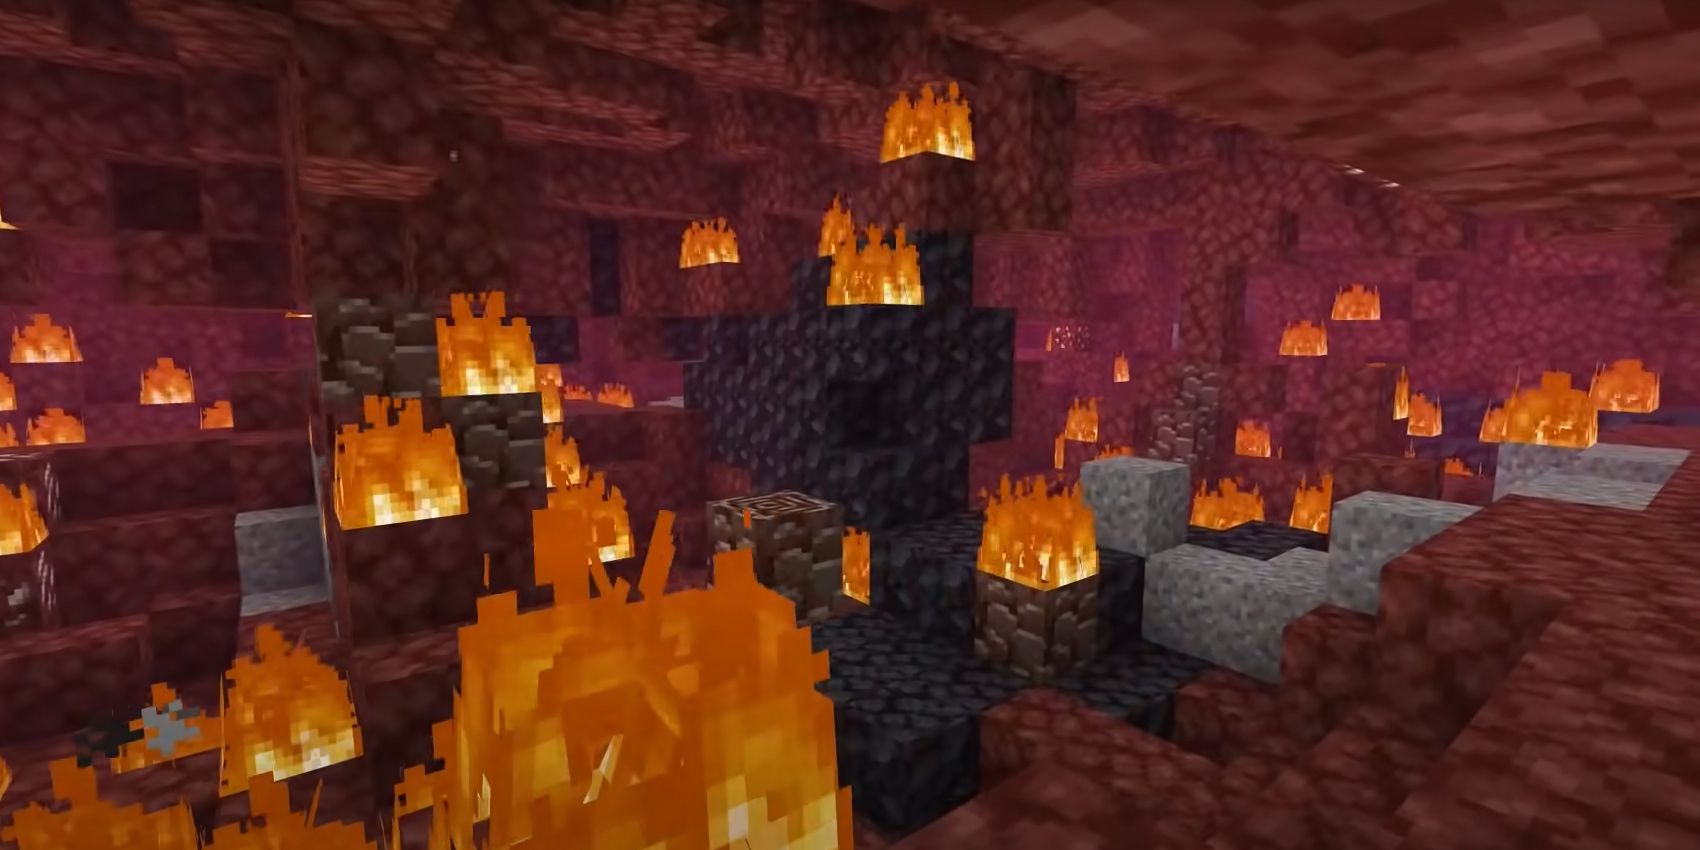 An image of the Nether in Minecraft with lots of areas on fire